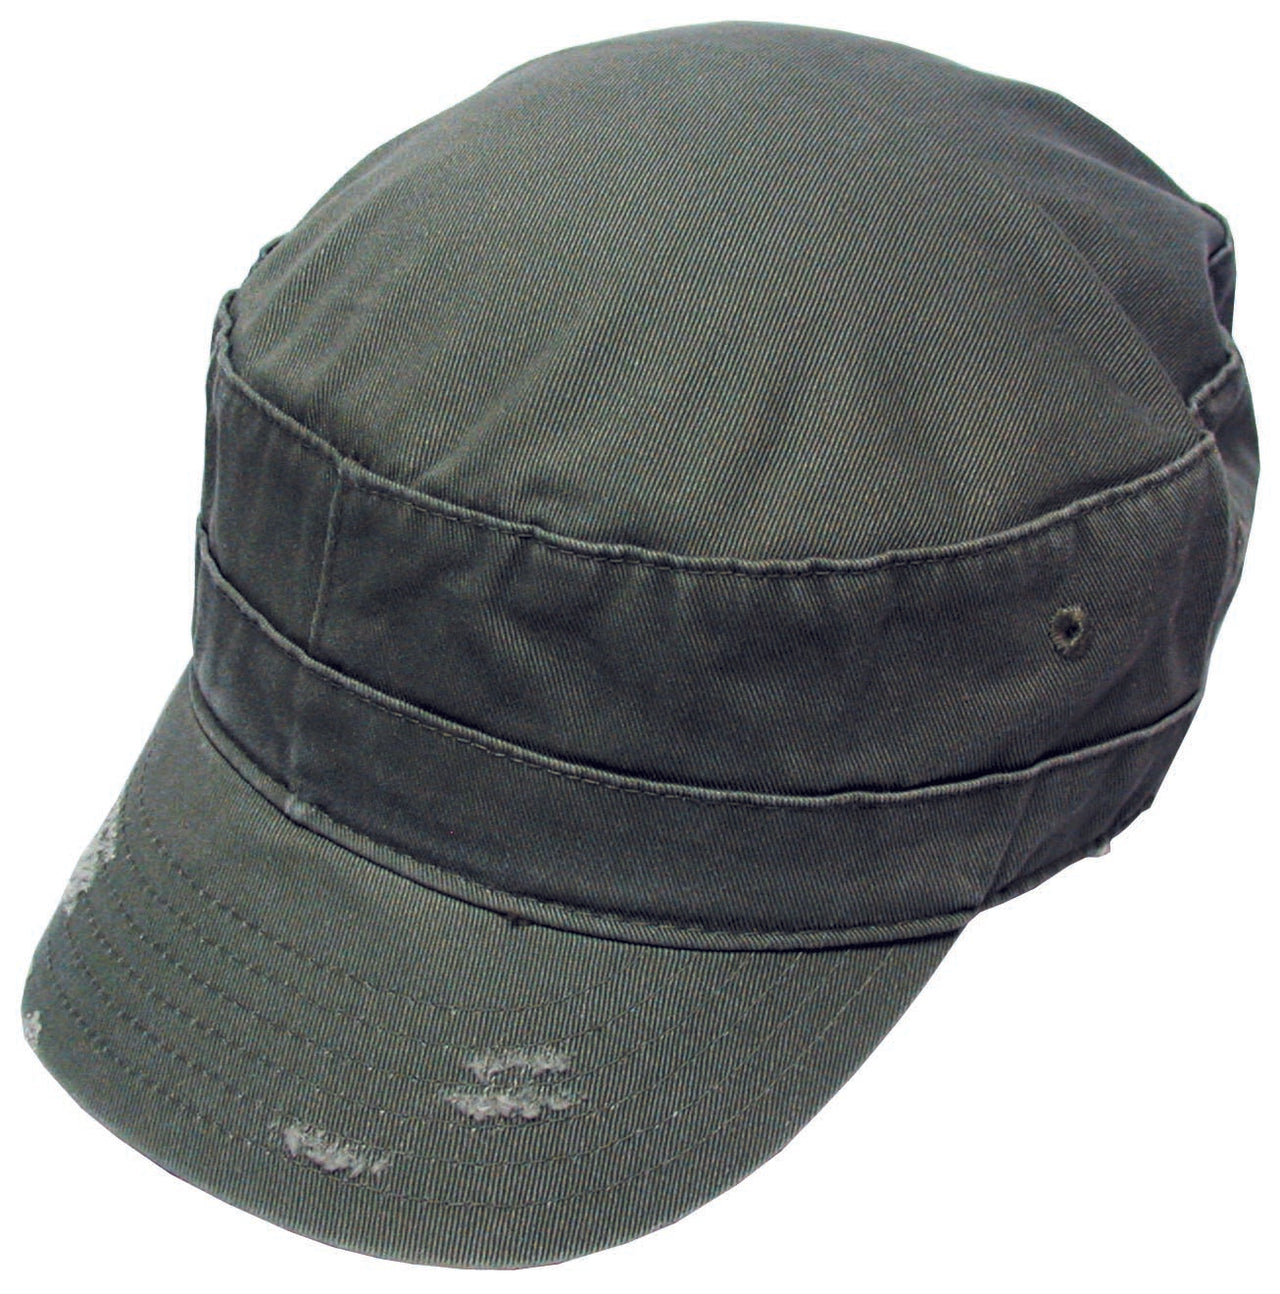 Avenel Enzyme Washed Cotton Twill Cadet Cap